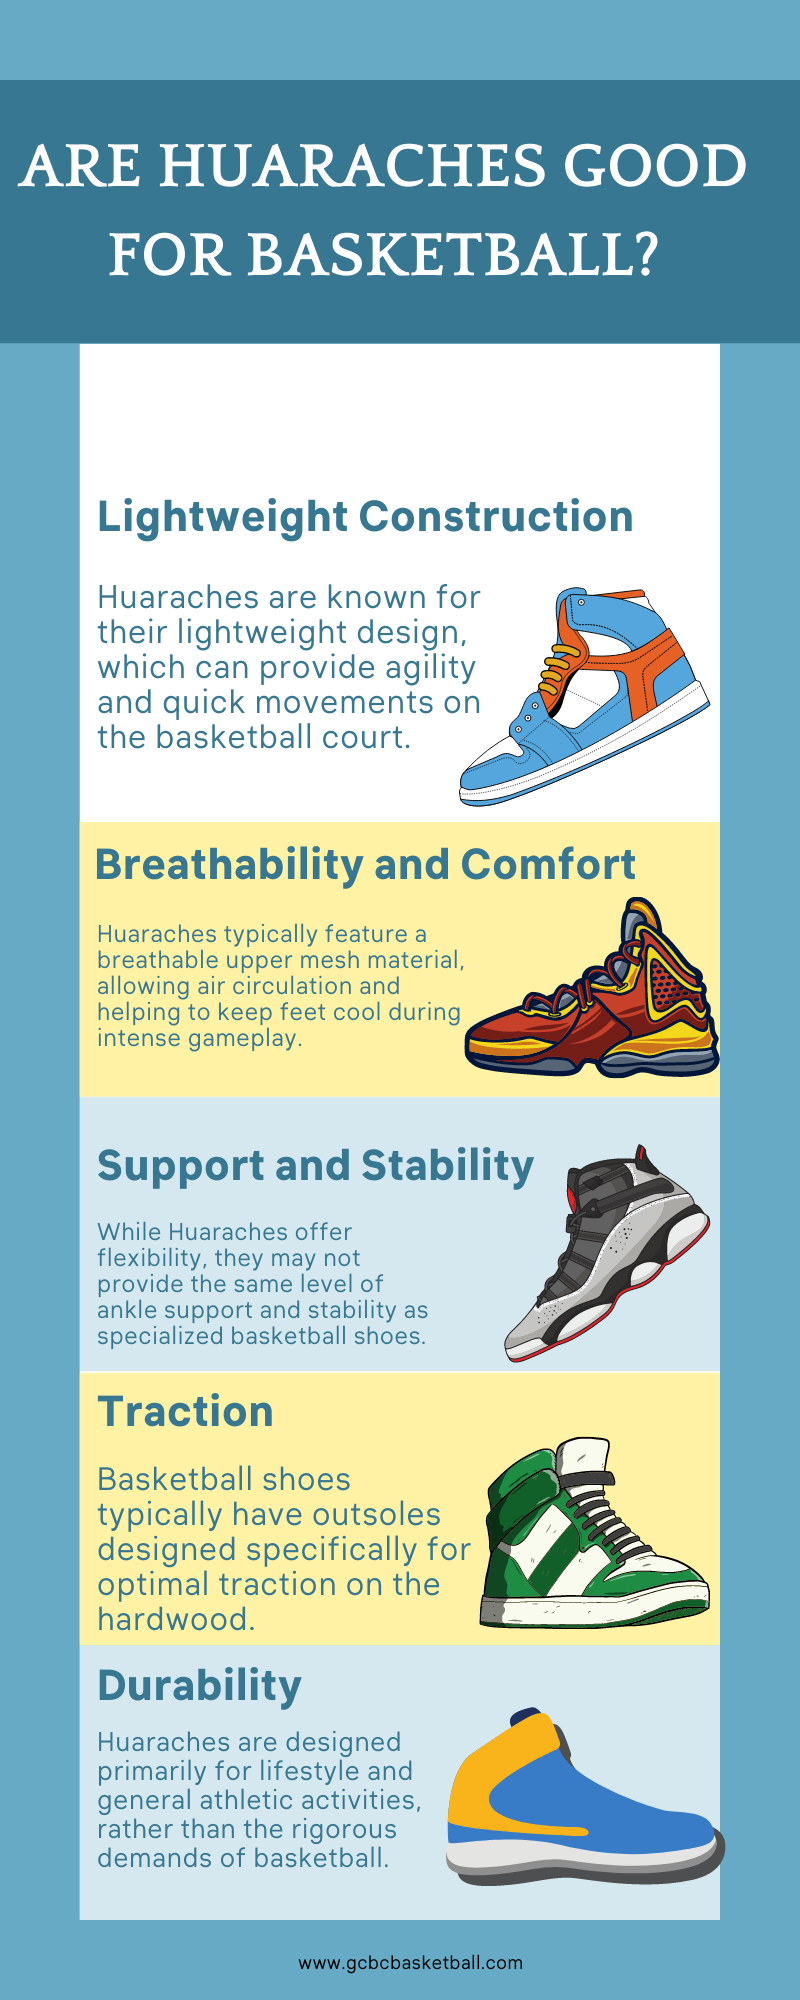 Top basketball shoes